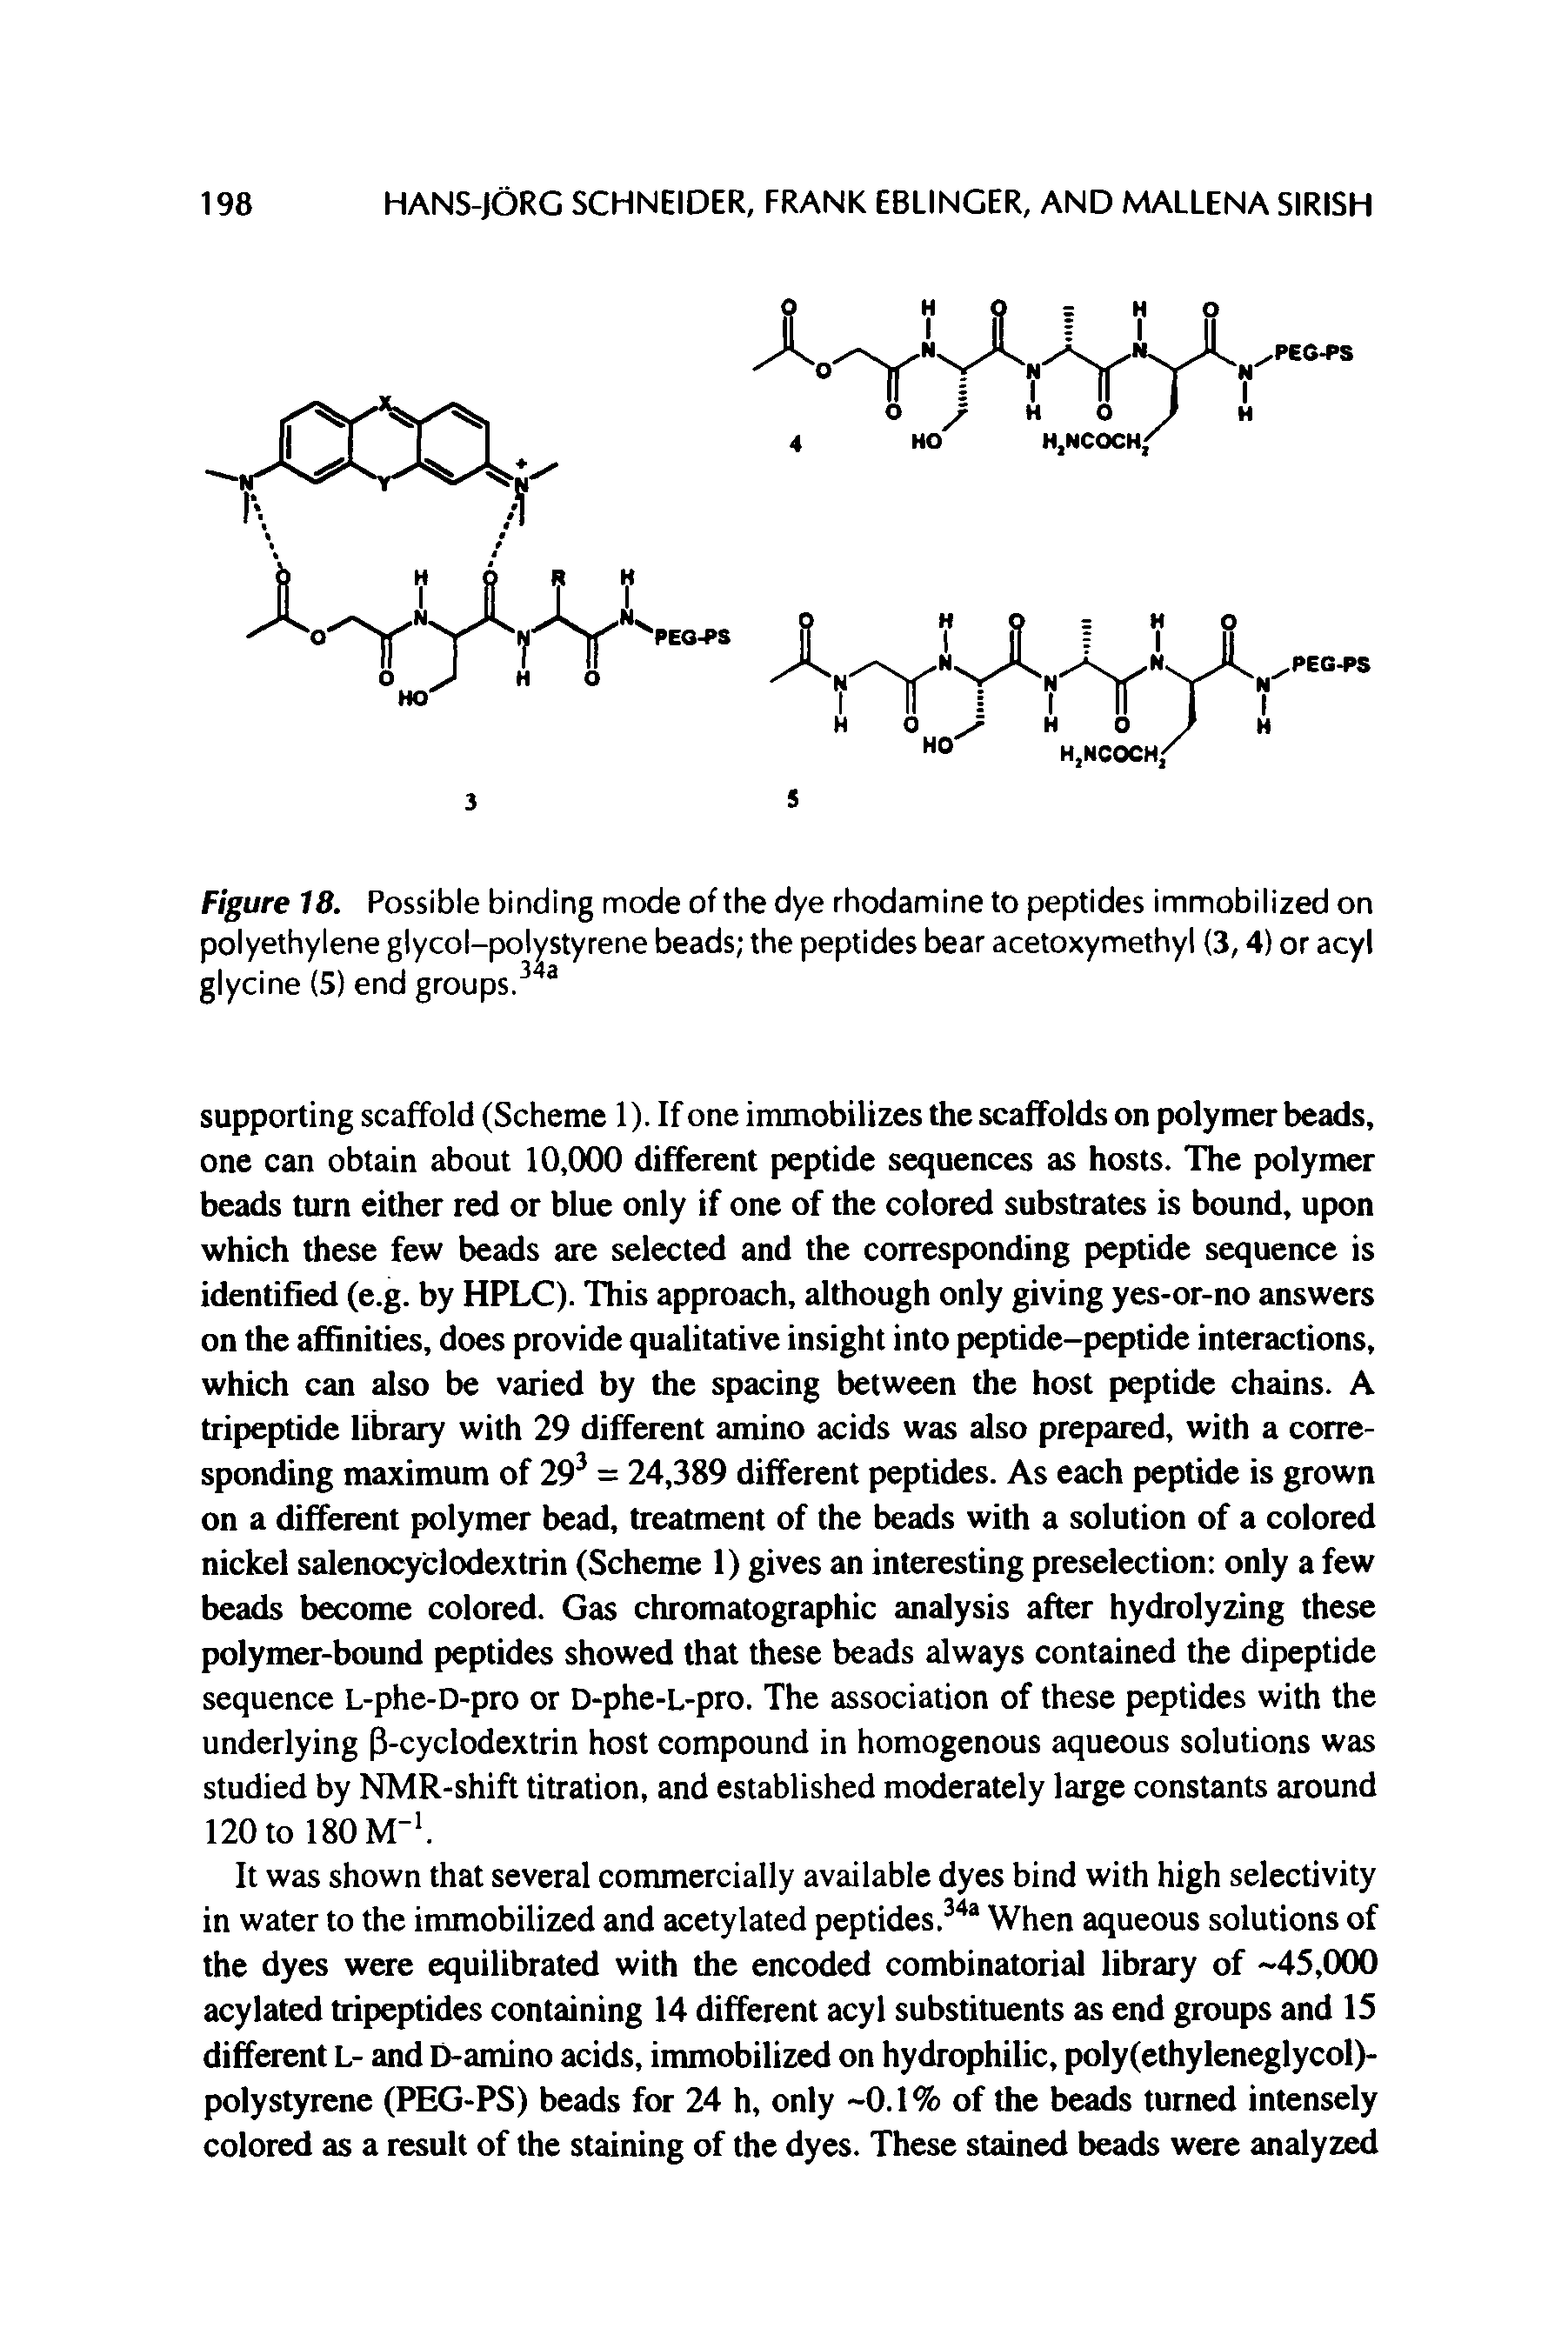 Figure 18. Possible binding mode of the dye rhodamine to peptides immobilized on polyethylene glycol-polystyrene beads the peptides bear acetoxymethyl (3,4) or acyl glycine (5) end groups. ...